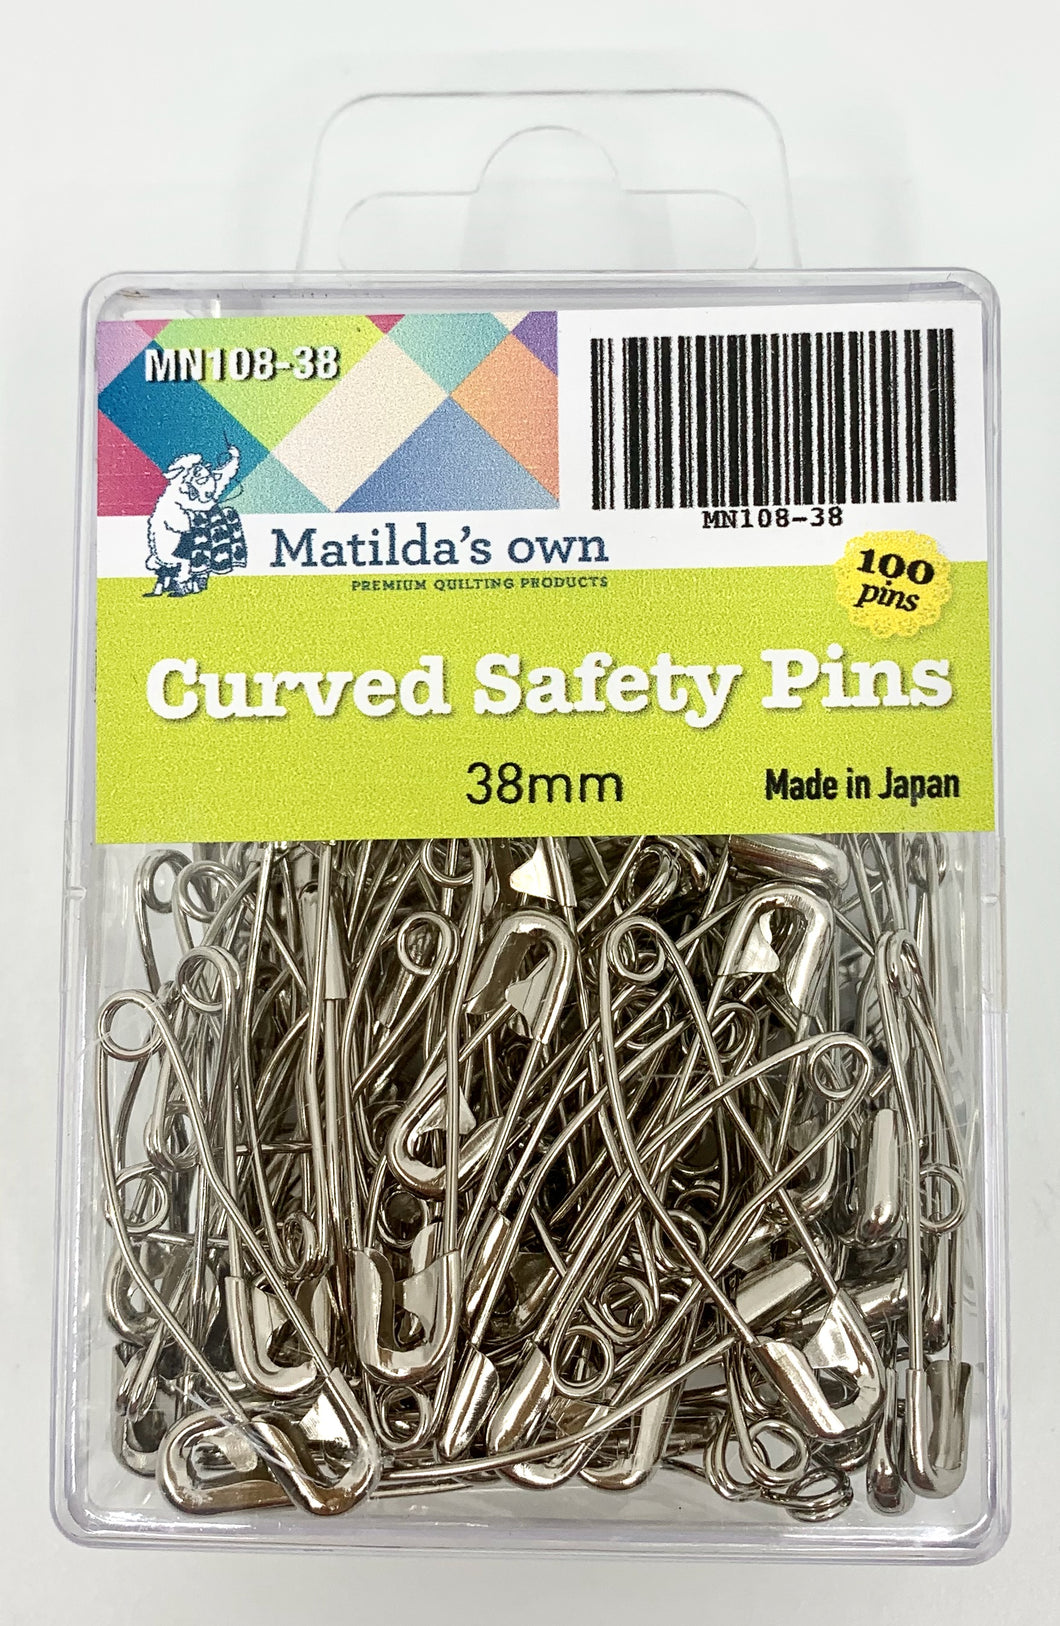 Matilda's Own Curved Safety Pins - 38mm